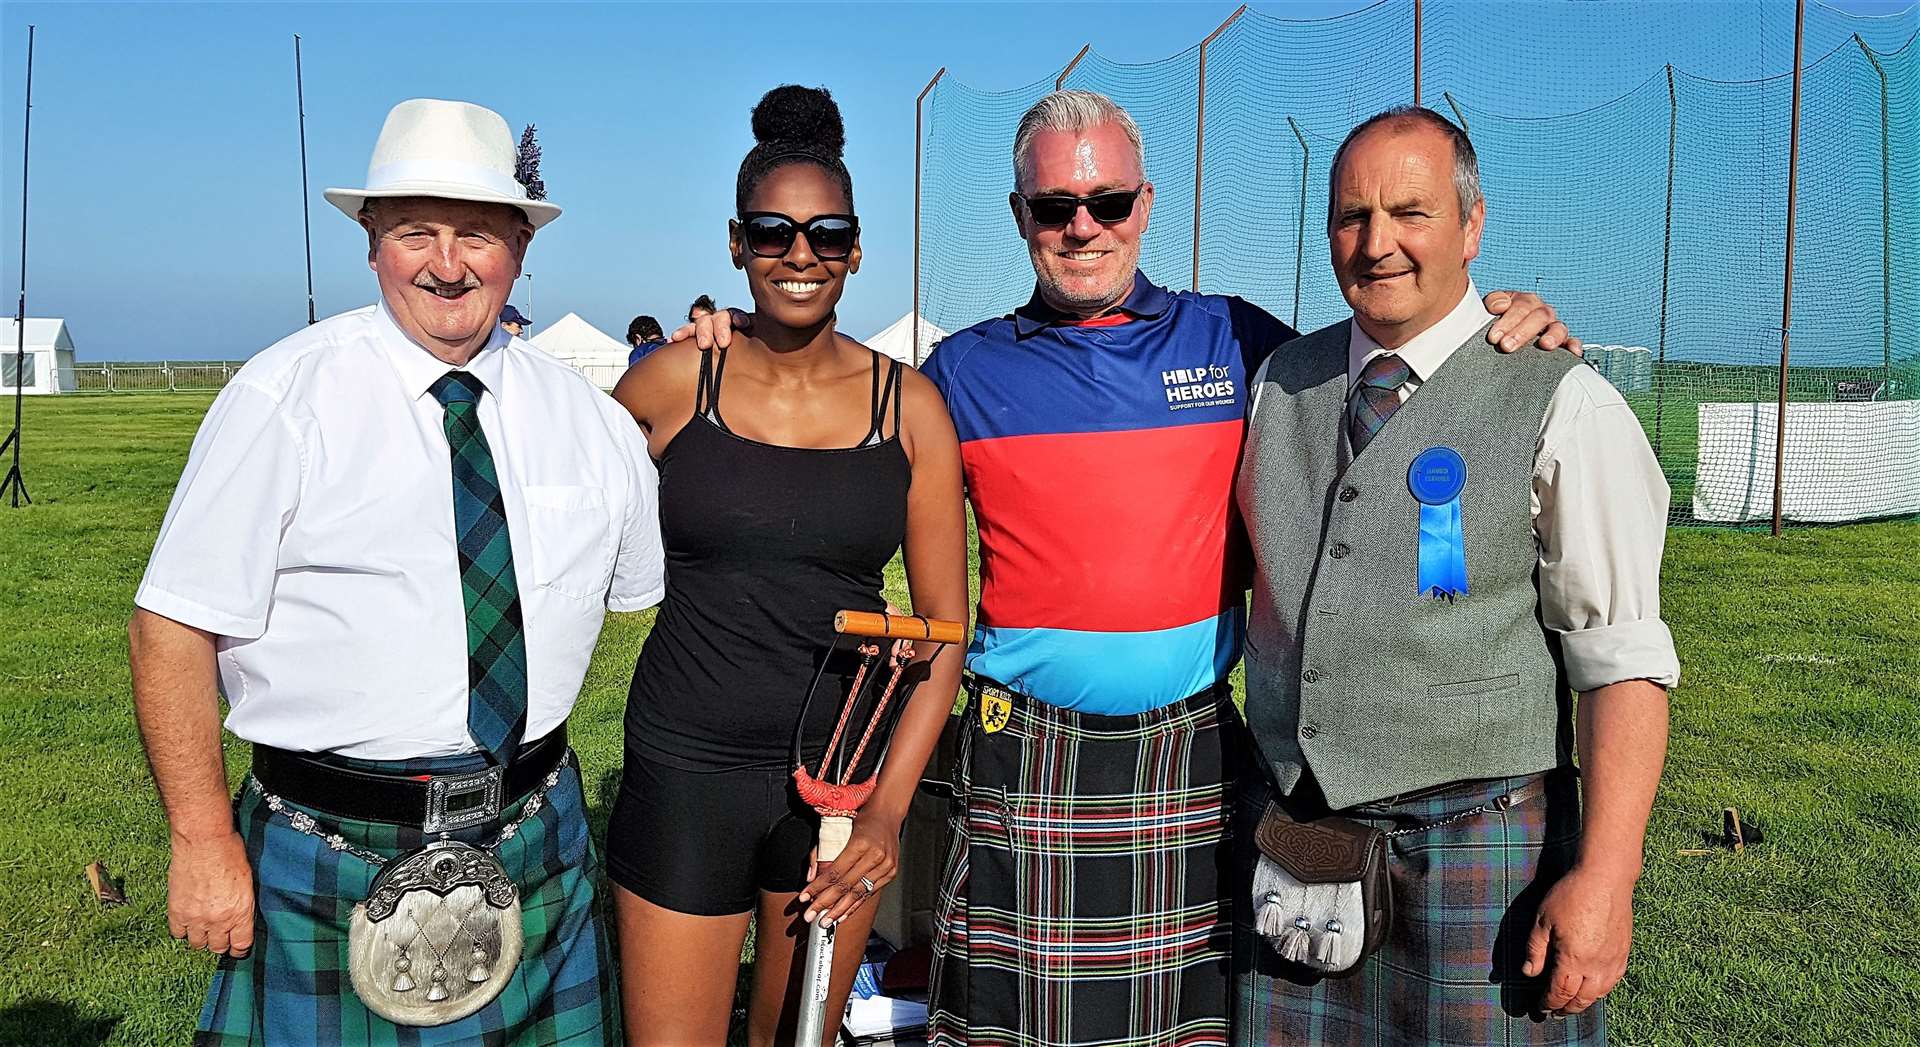 Mey Games compere Willie Mackay (left) with Californian athlete Jarvina Routt and her husband Stan along with games convener Henry Gunn at last year's event.